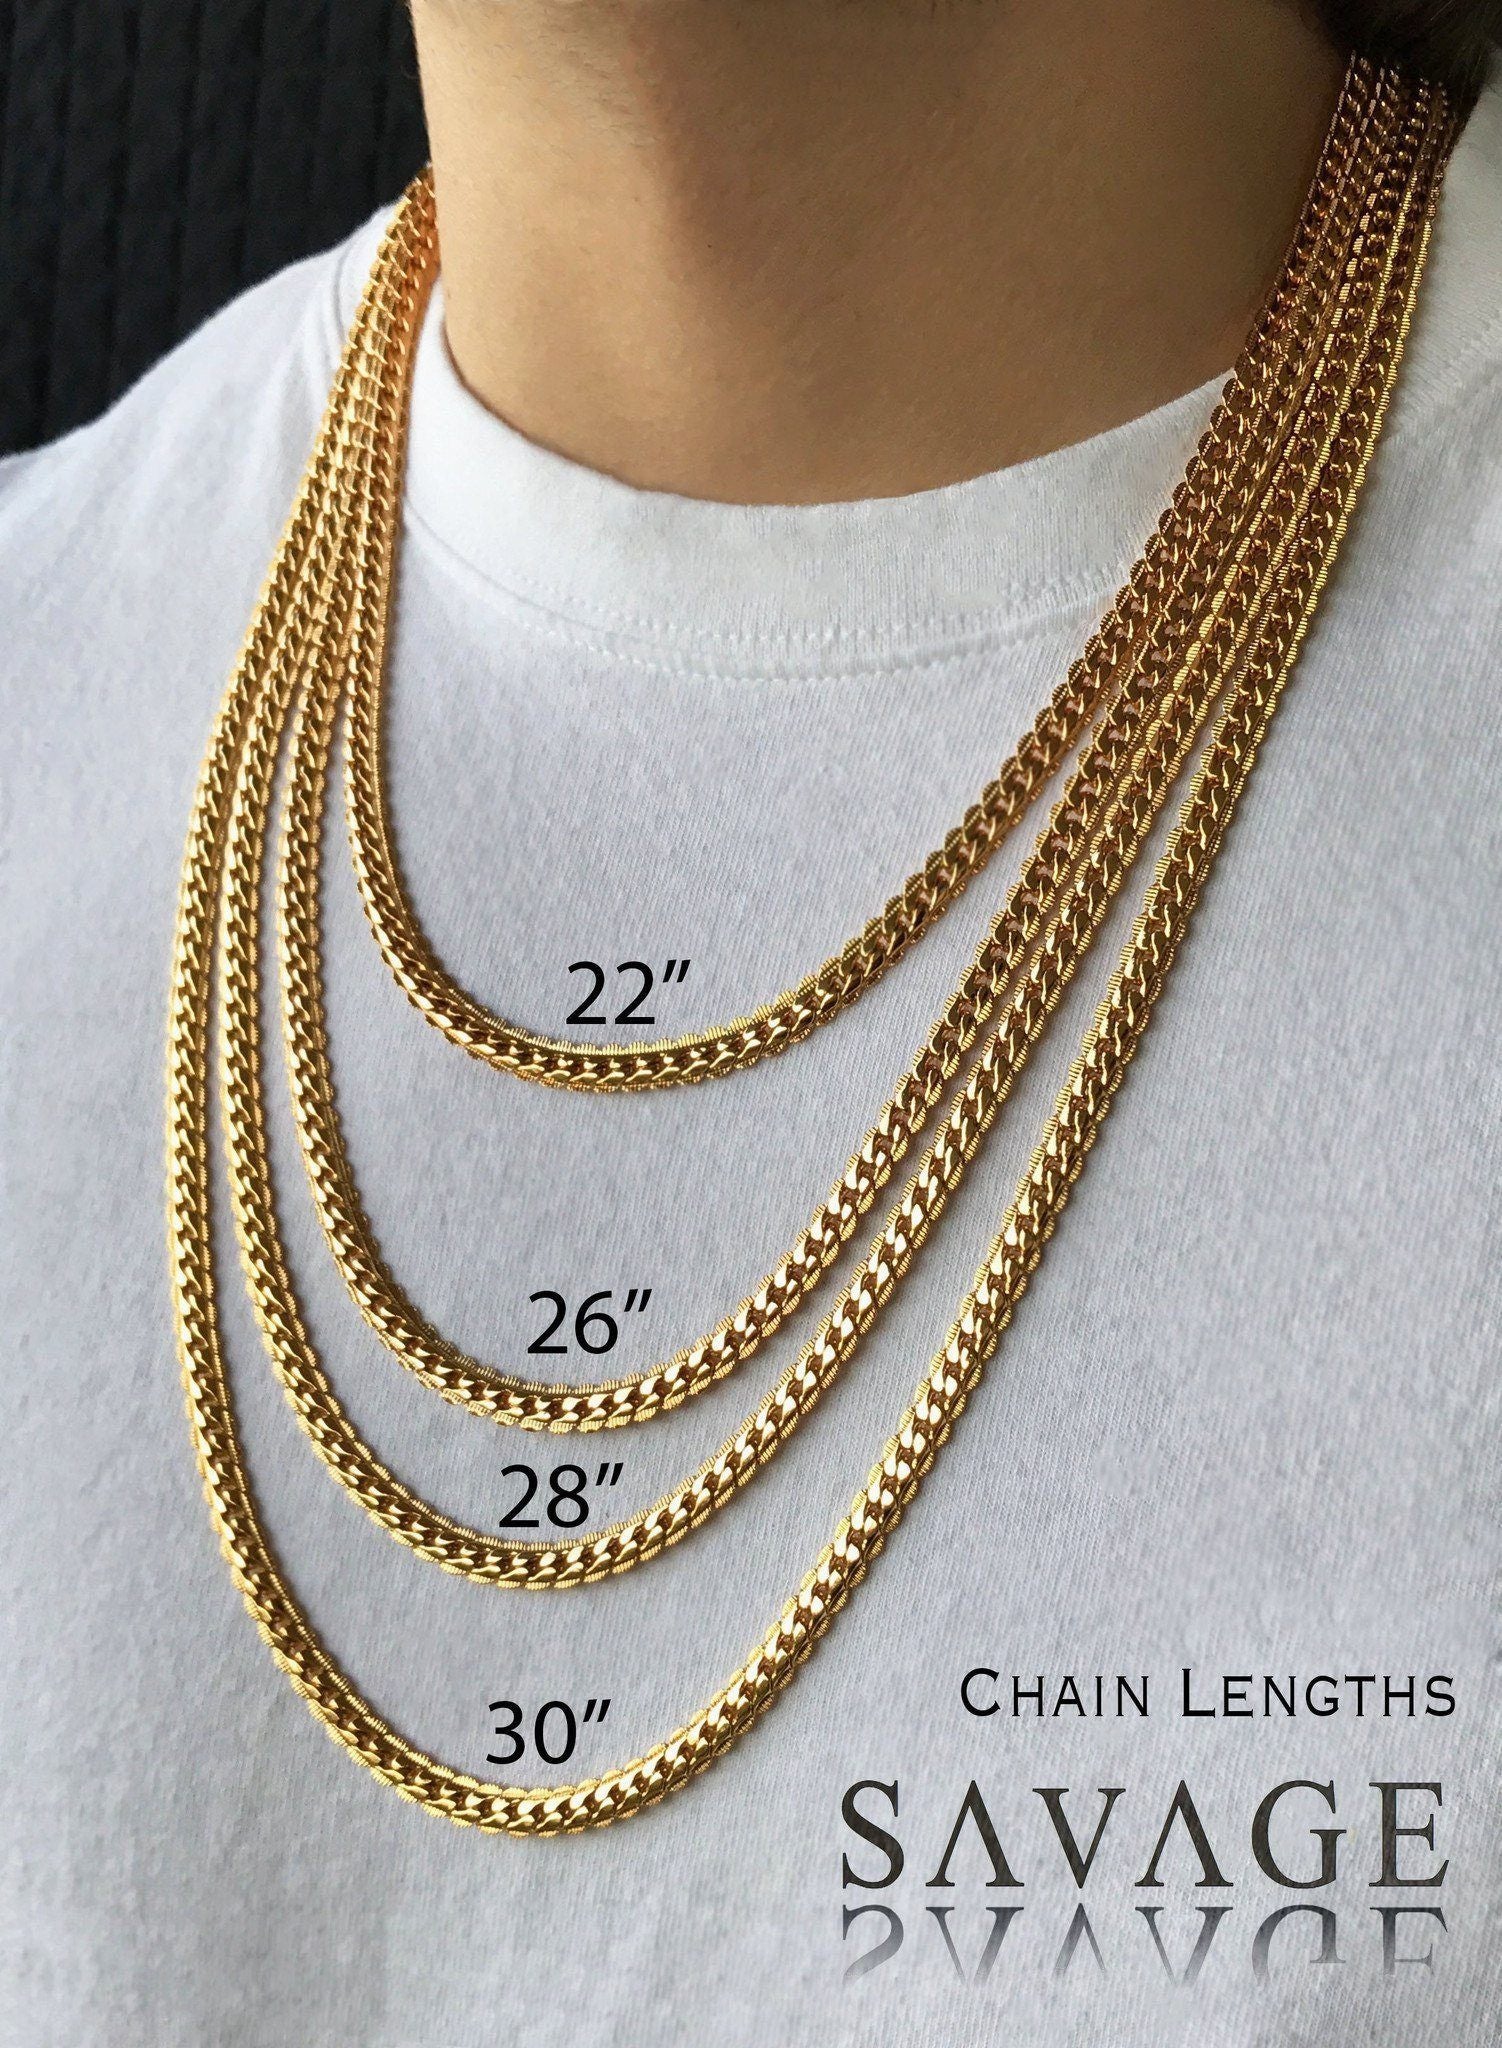 Necklace - The Magnus Chain X Stainless